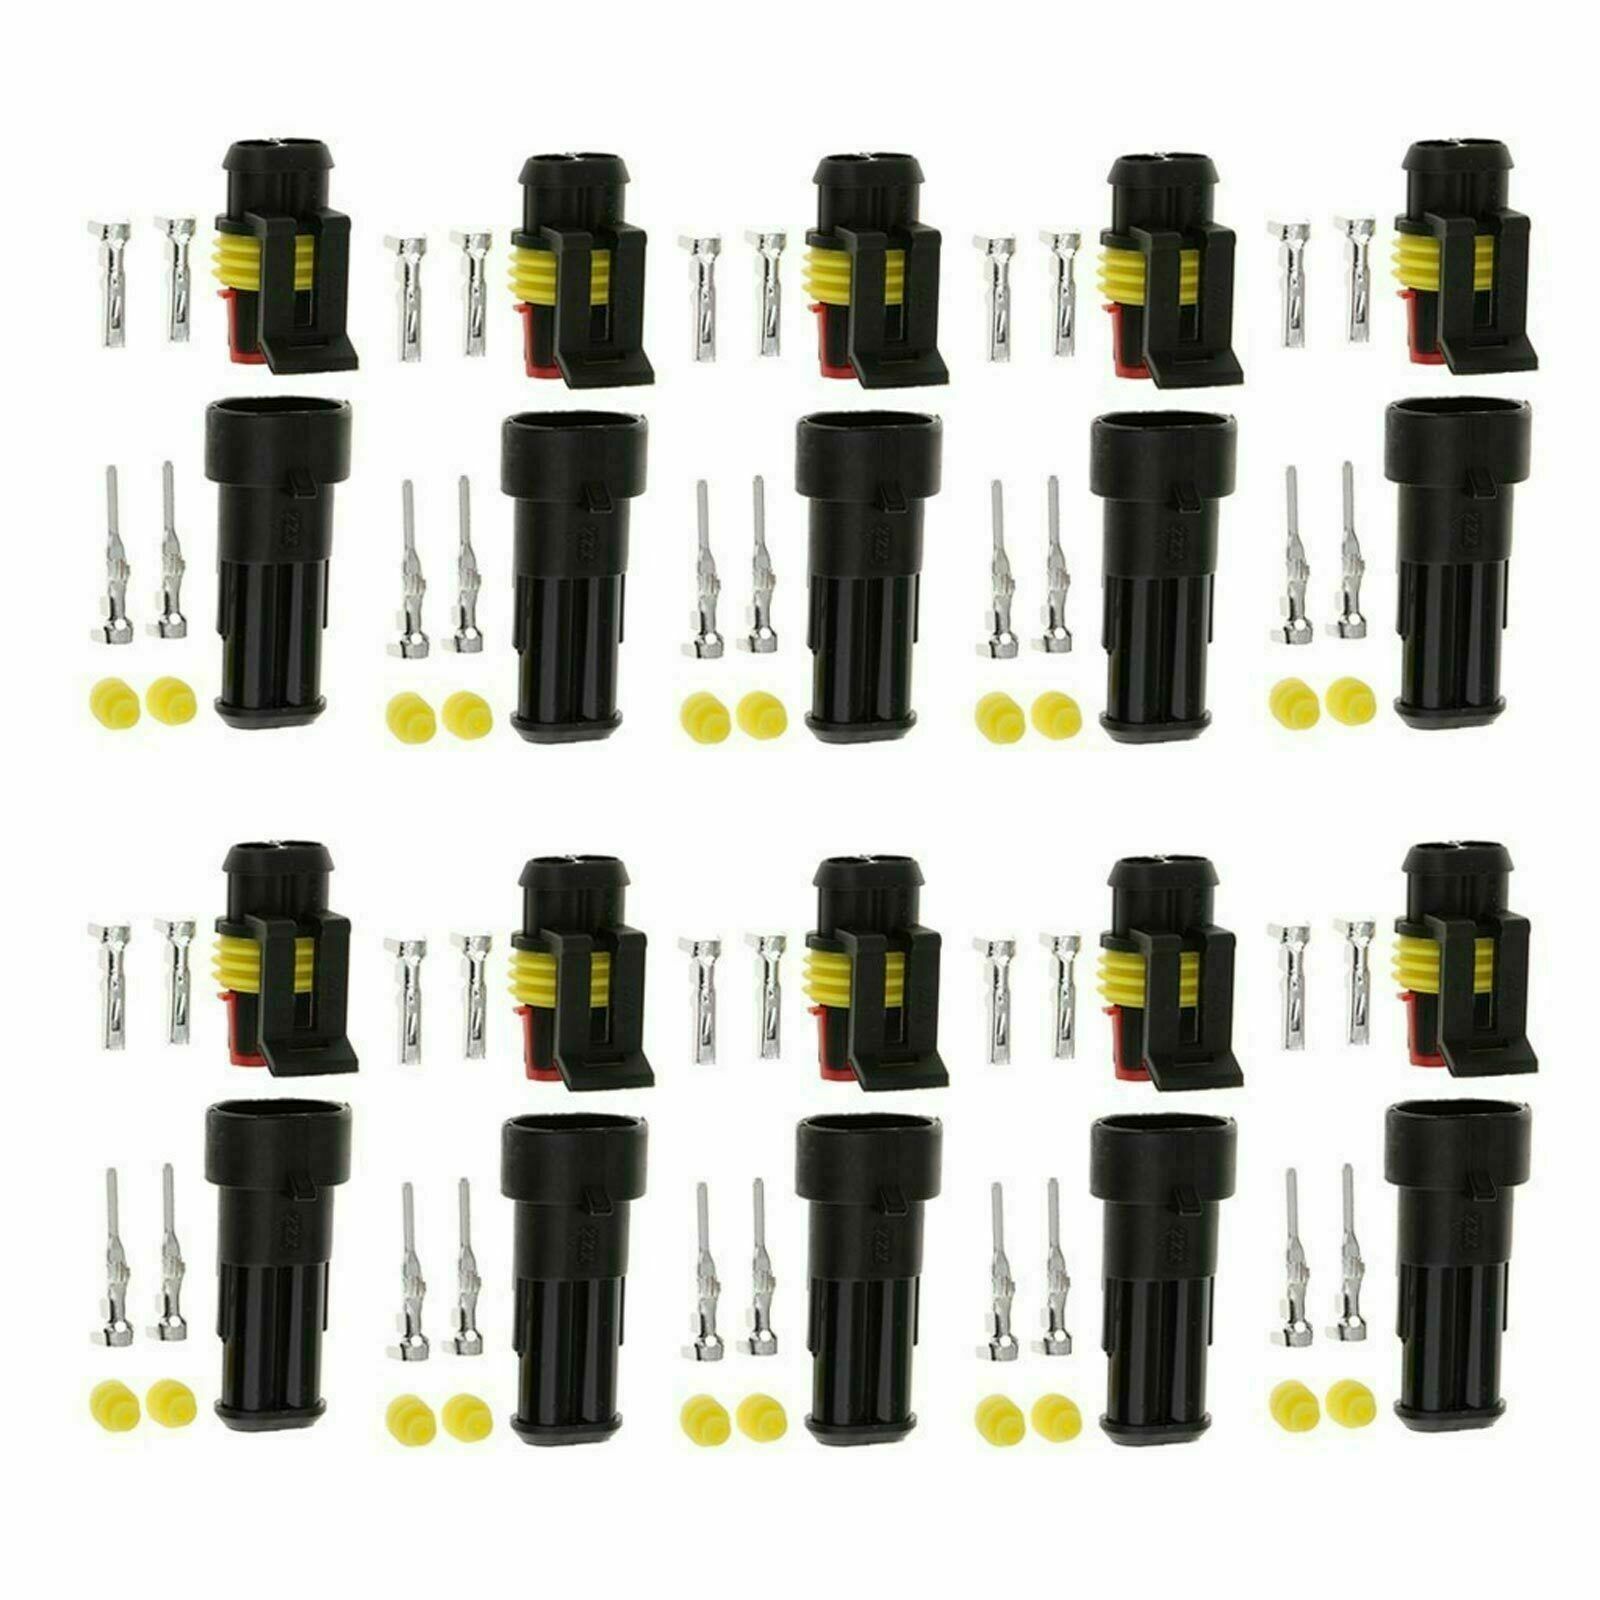 43 Set 708Pc Waterproof Car Auto Electrical Wire Connector Plug Kit 1-6 Pin Way